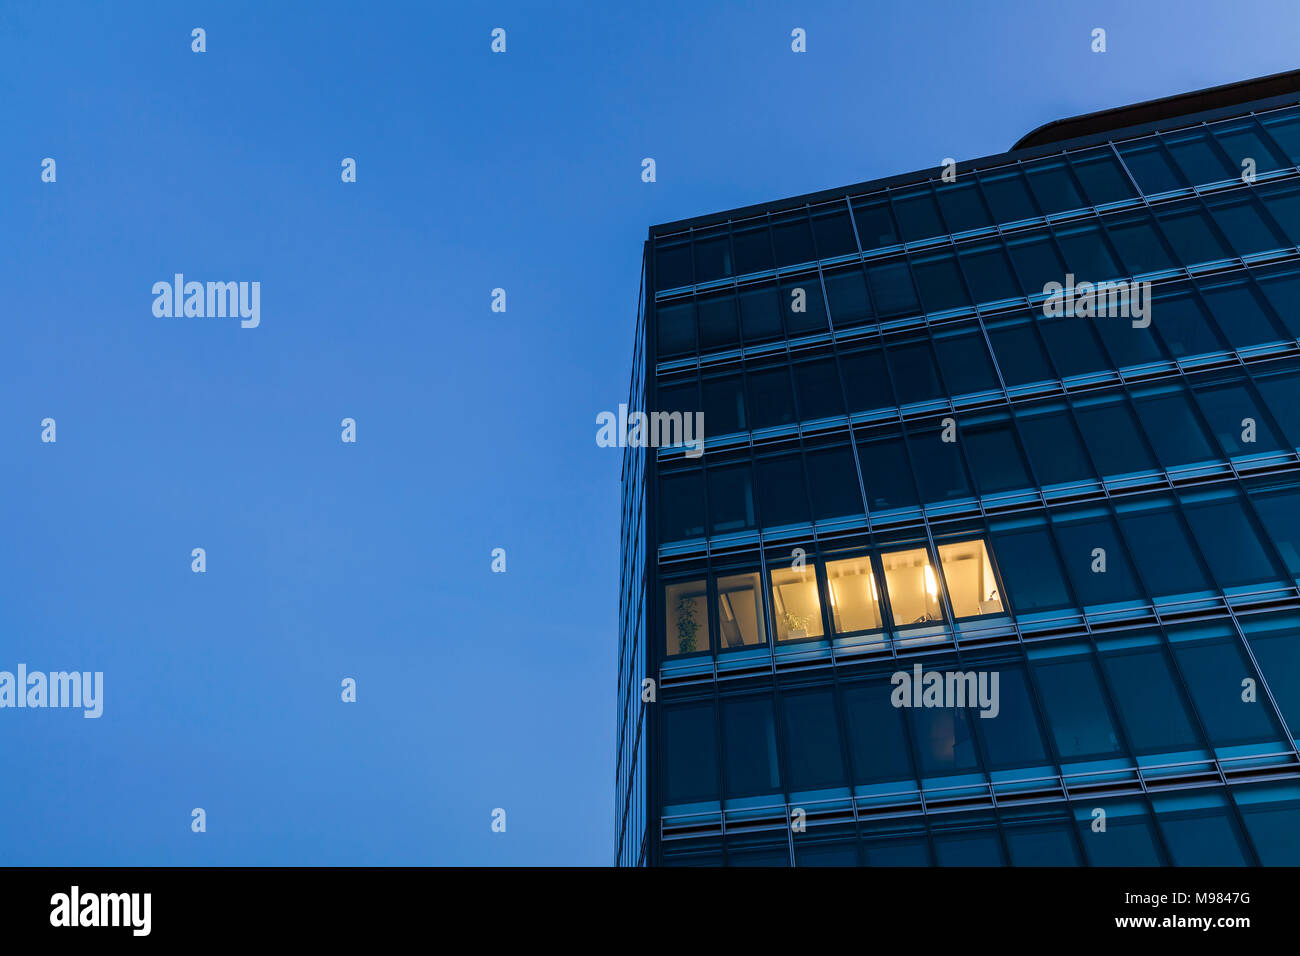 Allemagne, Bade-Wurtemberg, office building at night Banque D'Images